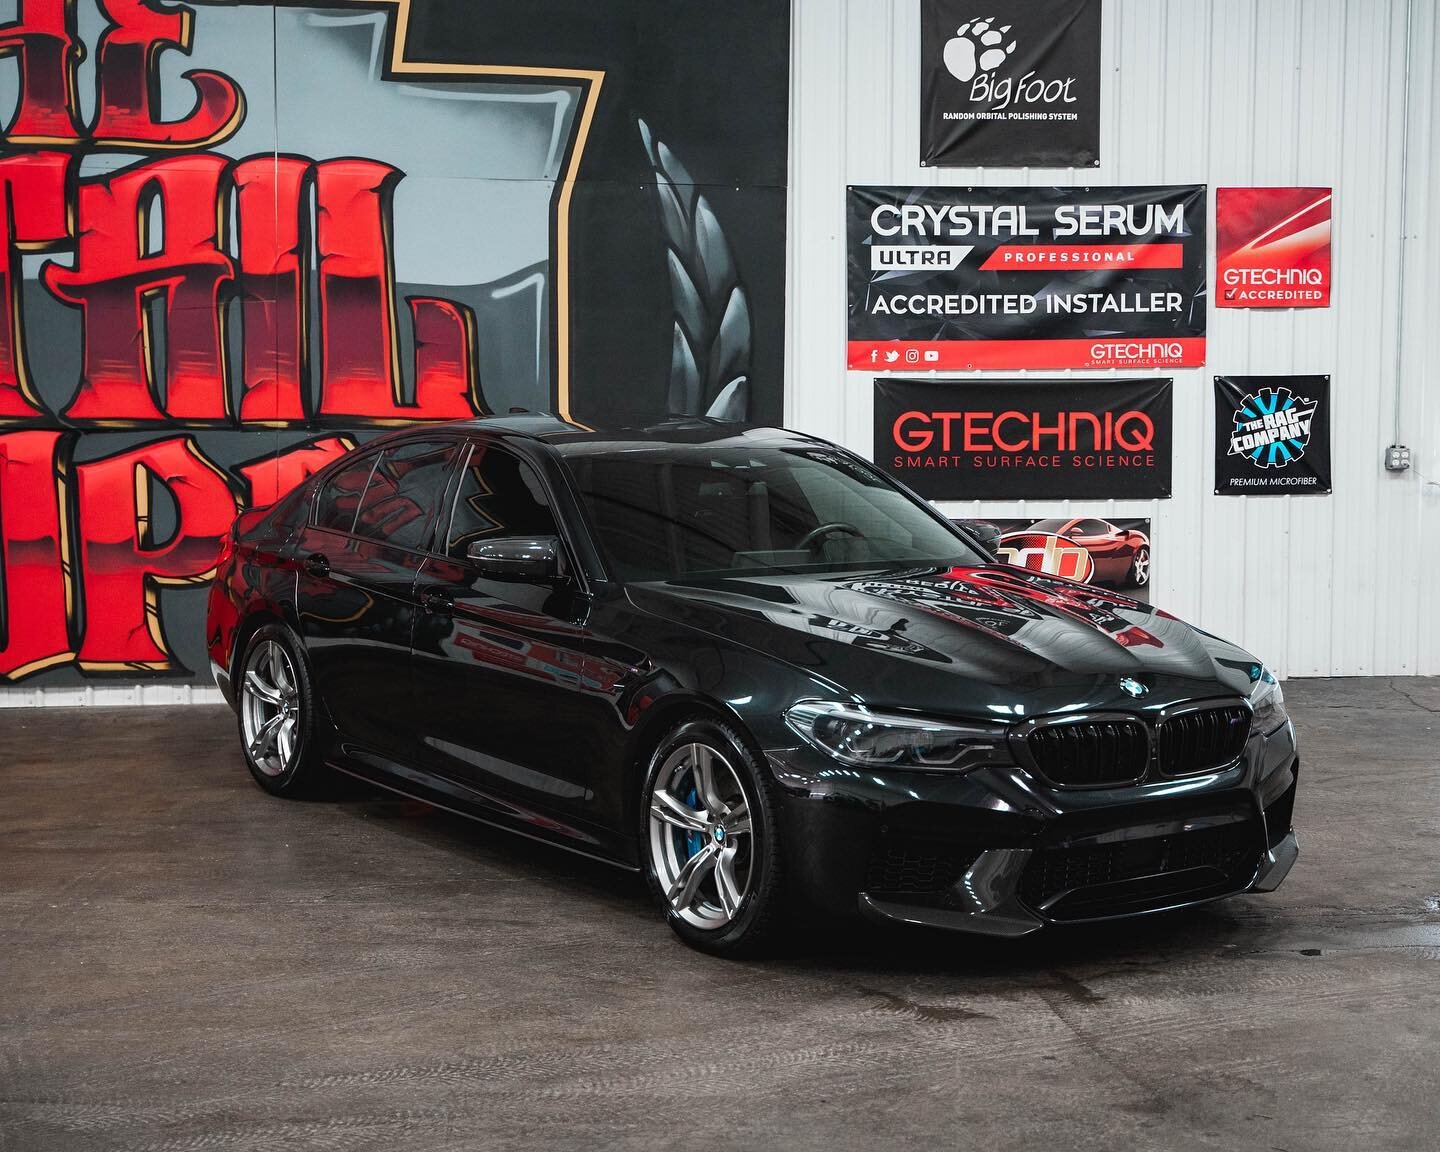 BMW M5 Competition fully loaded getting the works from the Shoppe, check it out!  #detail #details #detailers #detailersofinstagram #detailing #instagood #instalike #westmichigan #springlake #grandhaven #grandrapids #gtechniq #gtechniq_na #gtechniqac